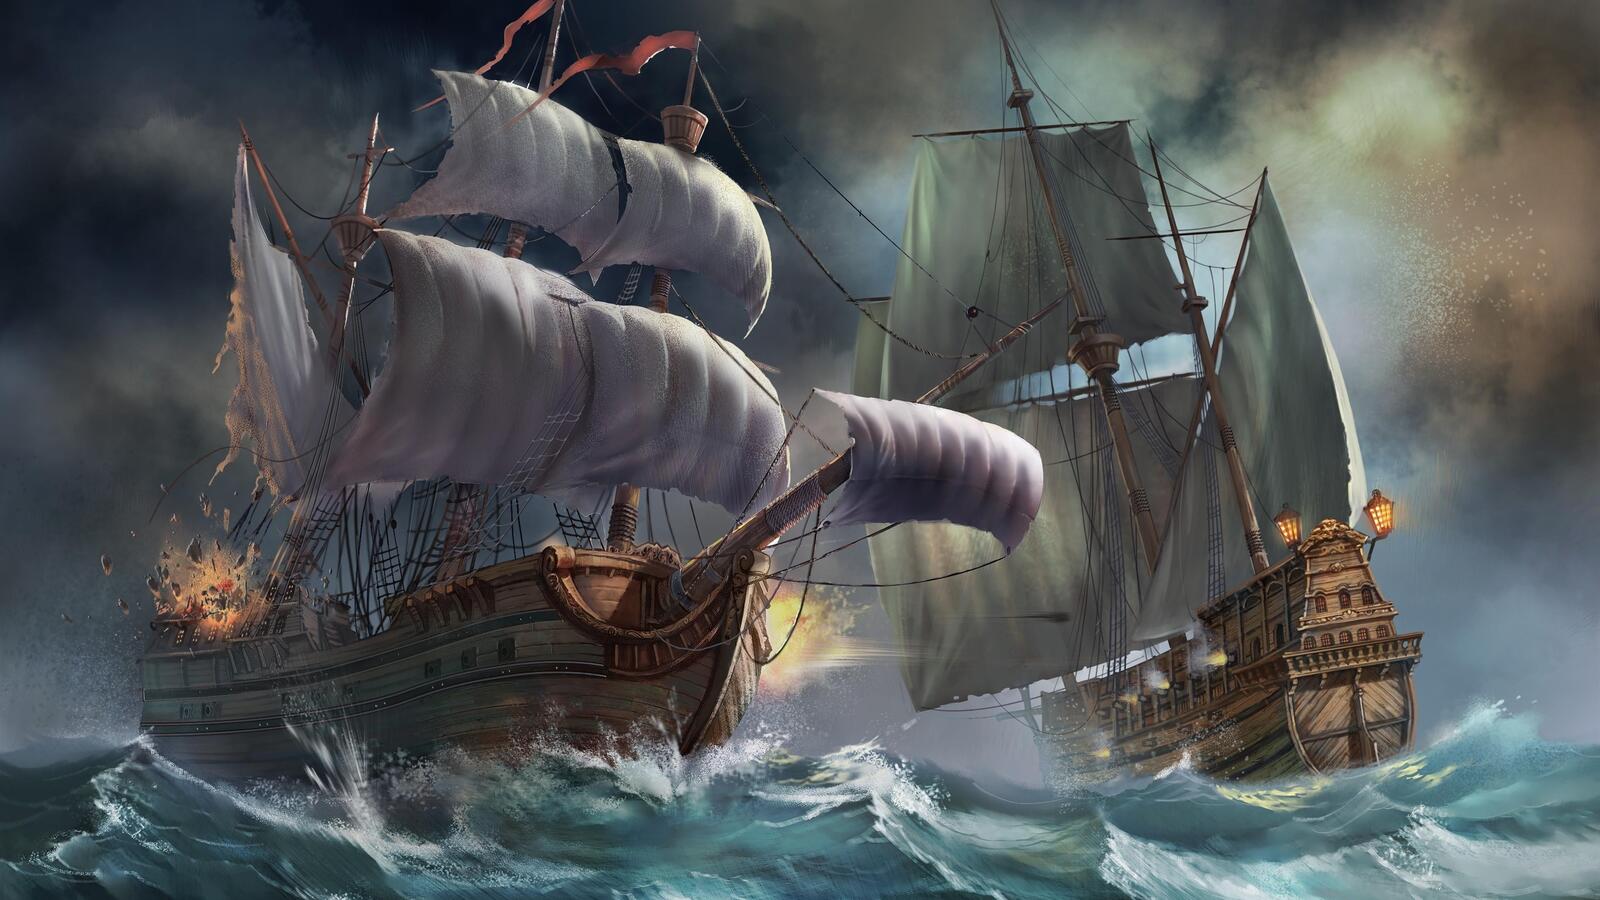 Wallpapers sailing ships storm ships and boats on the desktop